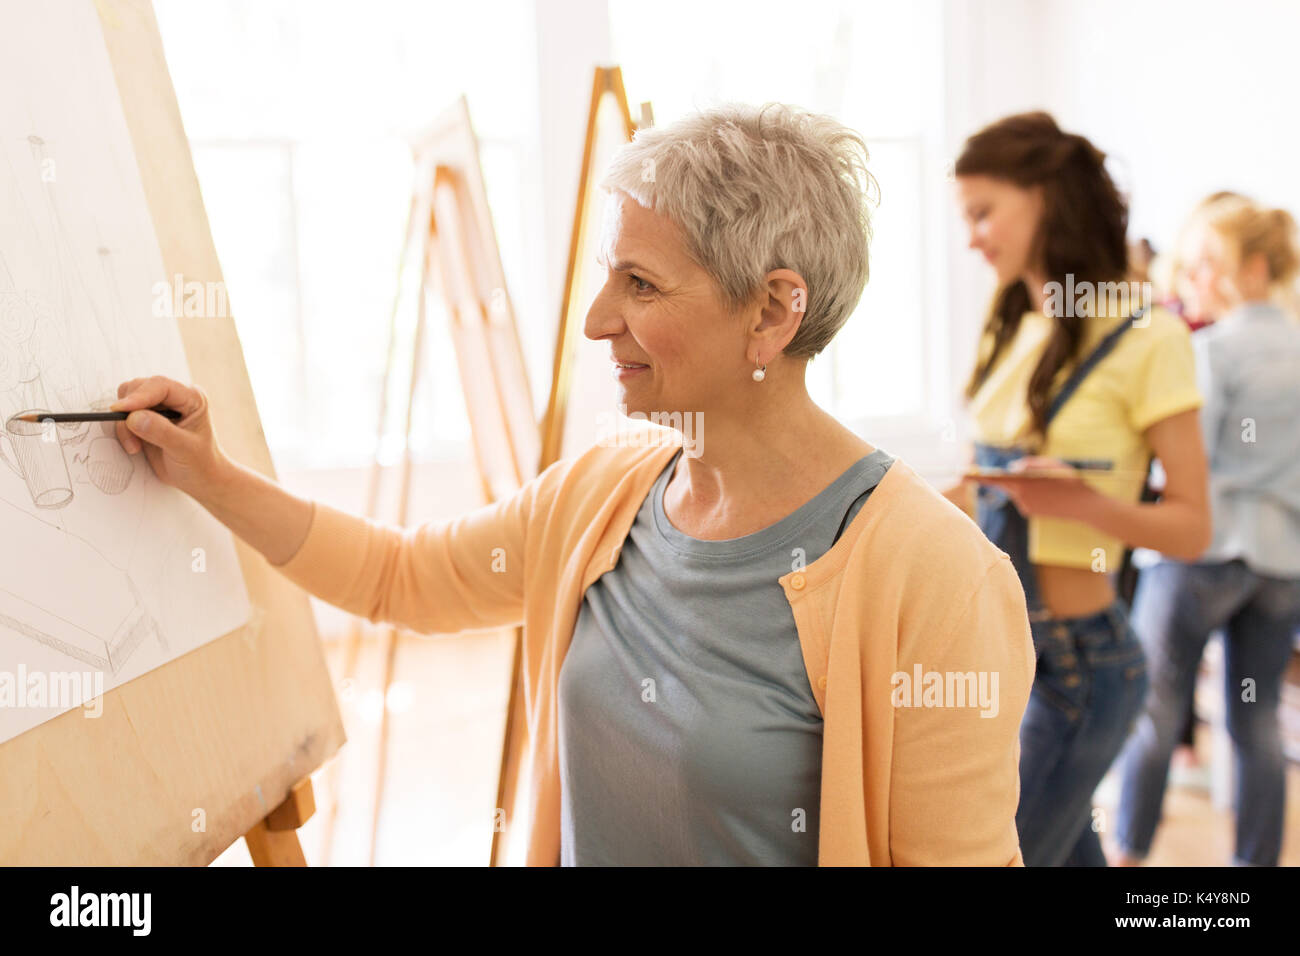 woman artist with easel painting at art studio Stock Photo by dolgachov